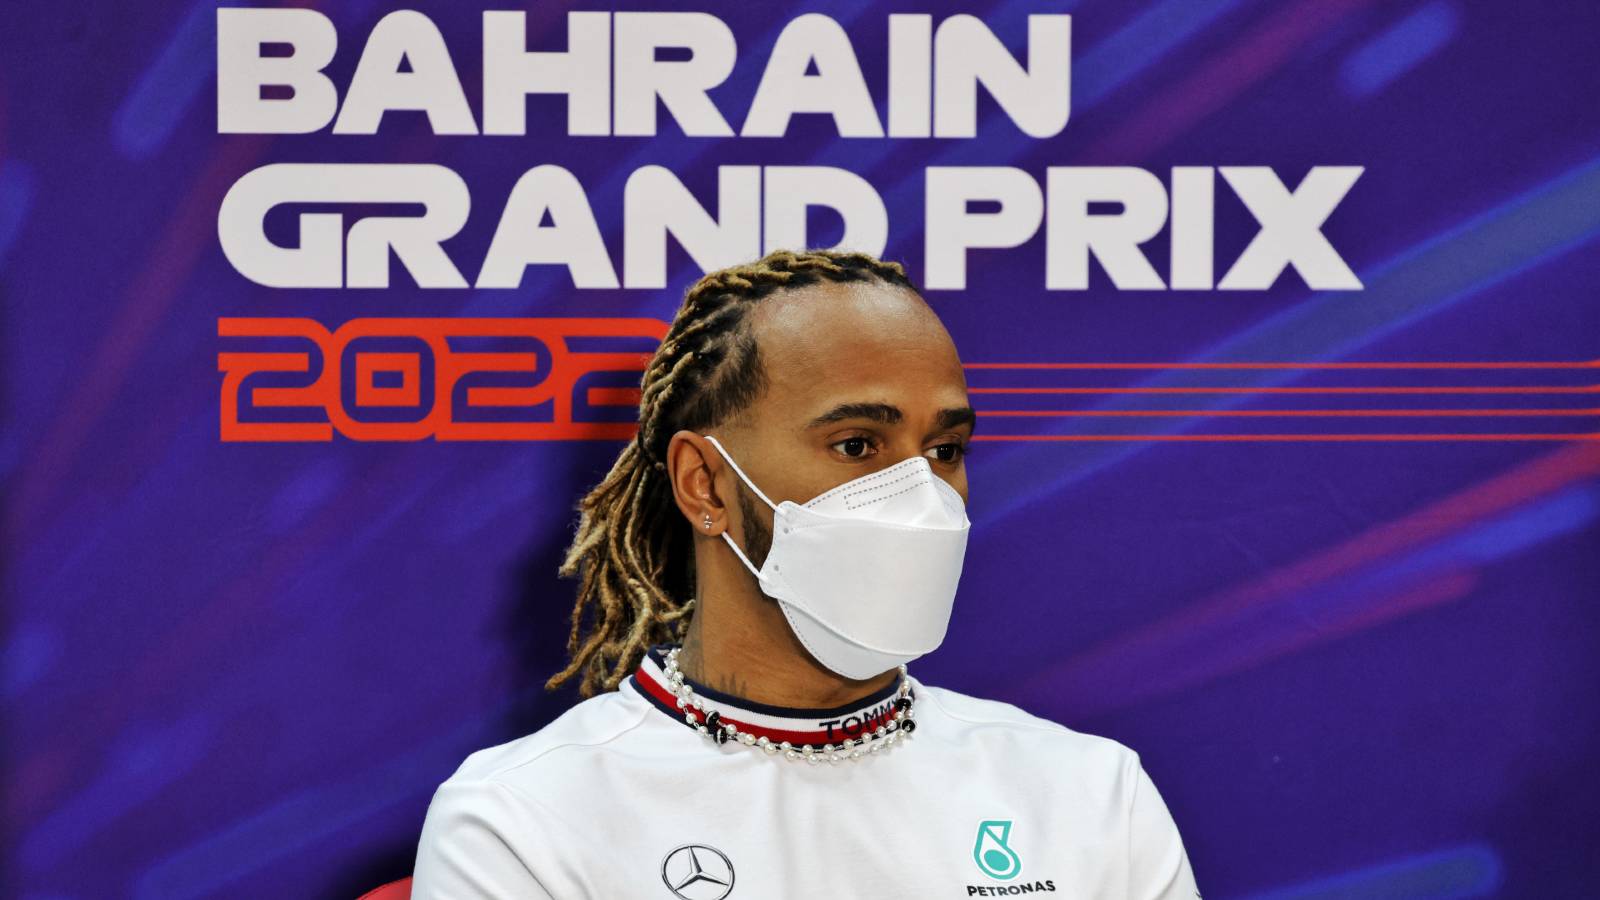 Lewis Hamilton at a press conference in Bahrain. Sakhir March 2022.